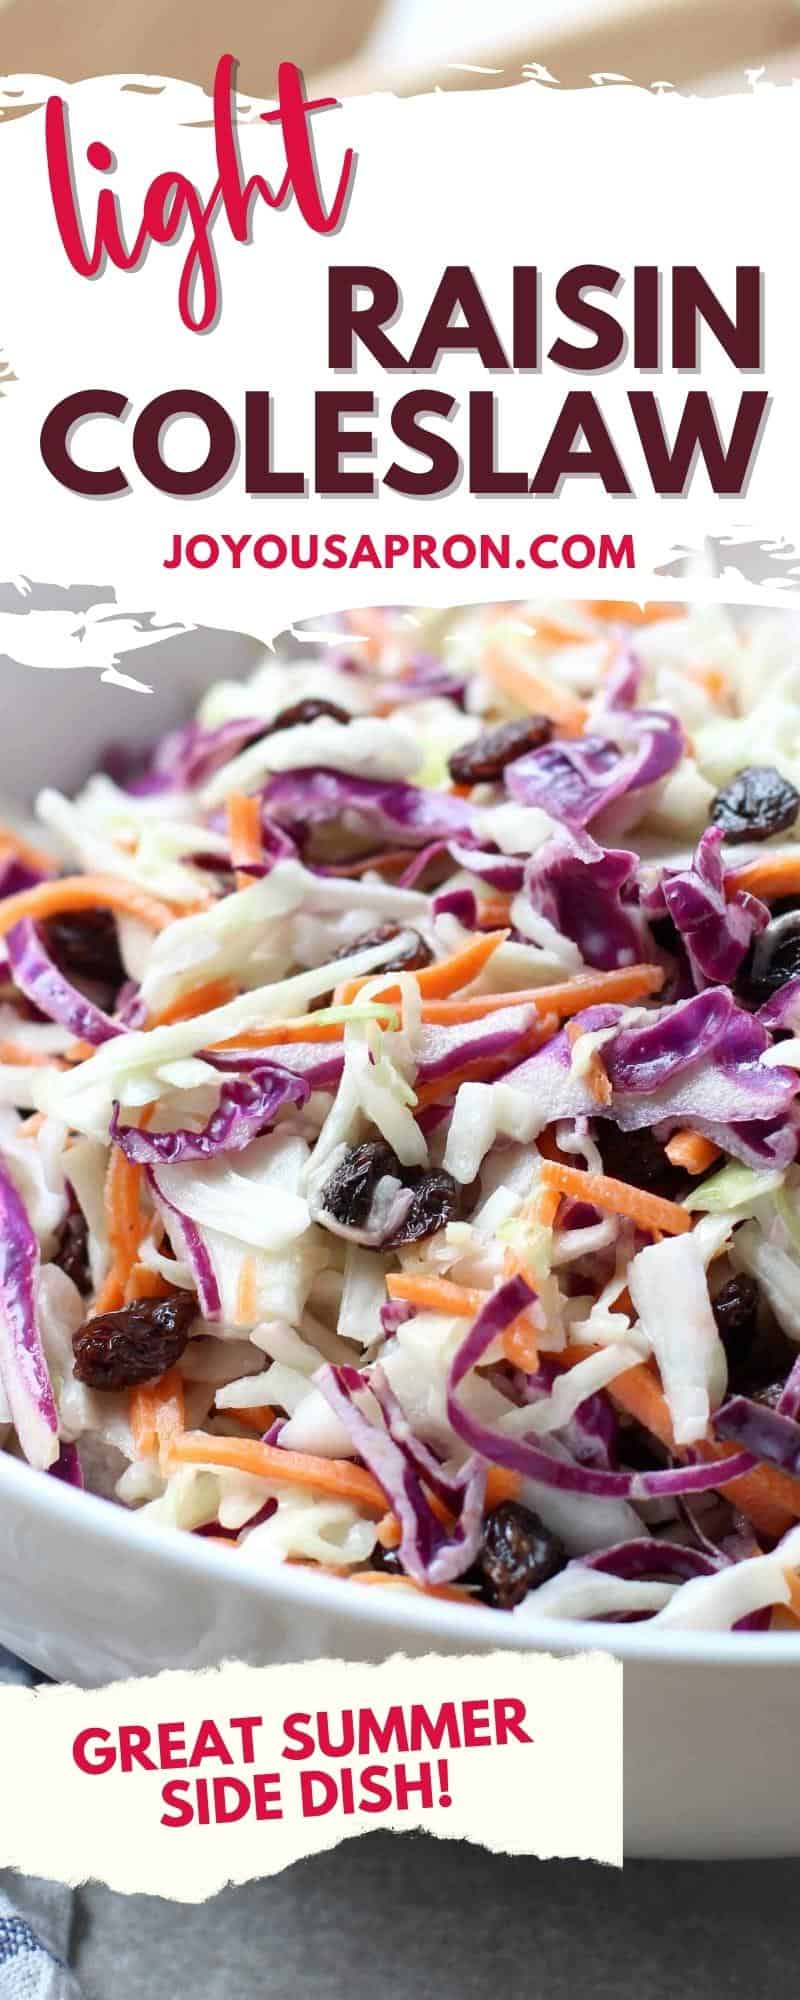 Light and Healthy Coleslaw - A lighter and healthier version of coleslaw! Full of flavor and crunch - this is the perfect no-cook side dish for summer dinners and cookouts. Takes only 10 minutes to make! via @joyousapron